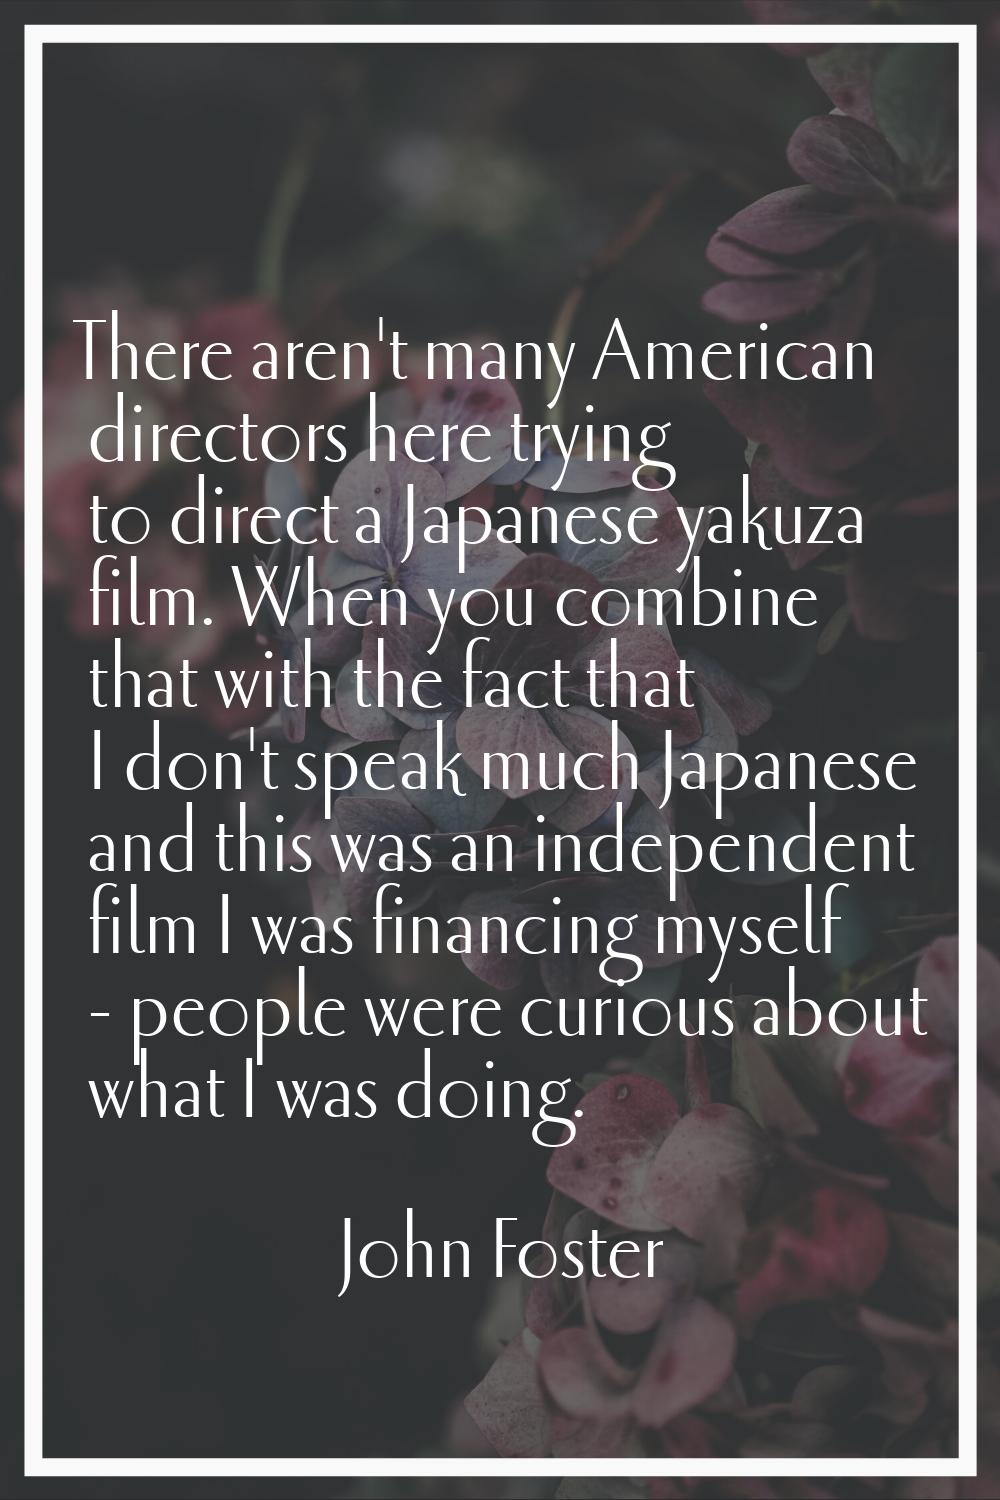 There aren't many American directors here trying to direct a Japanese yakuza film. When you combine